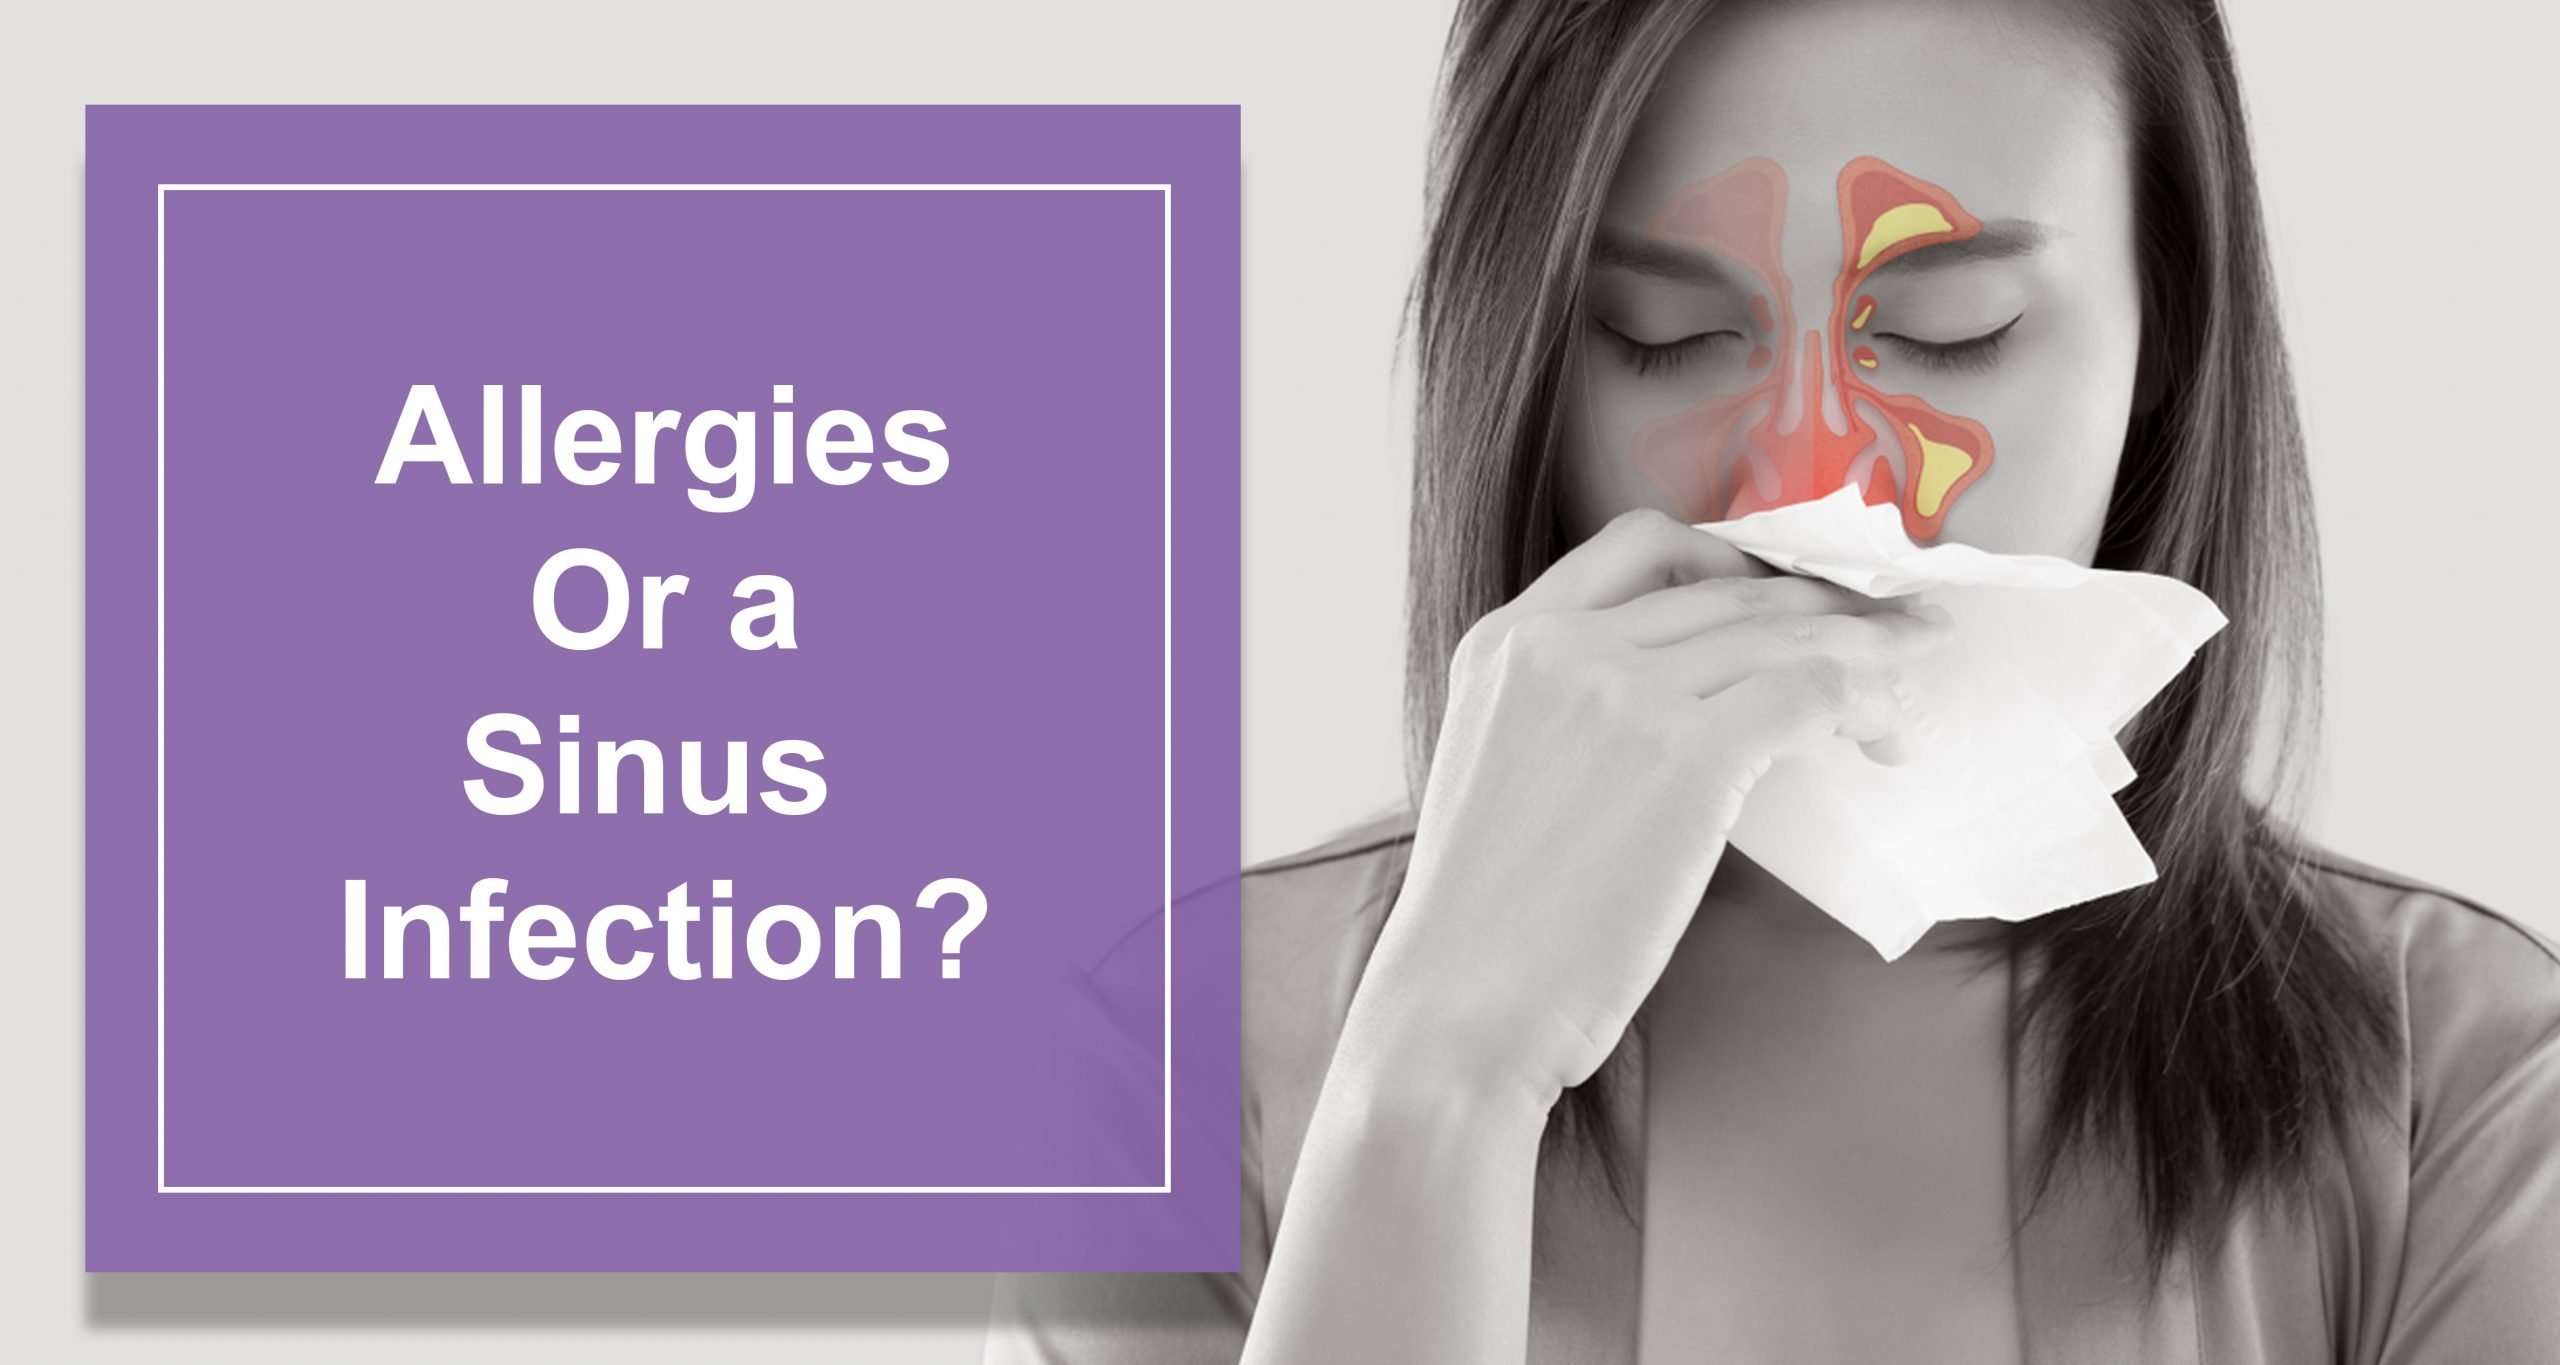 Allergies Or a Sinus Infection? Major Symptoms And Differences